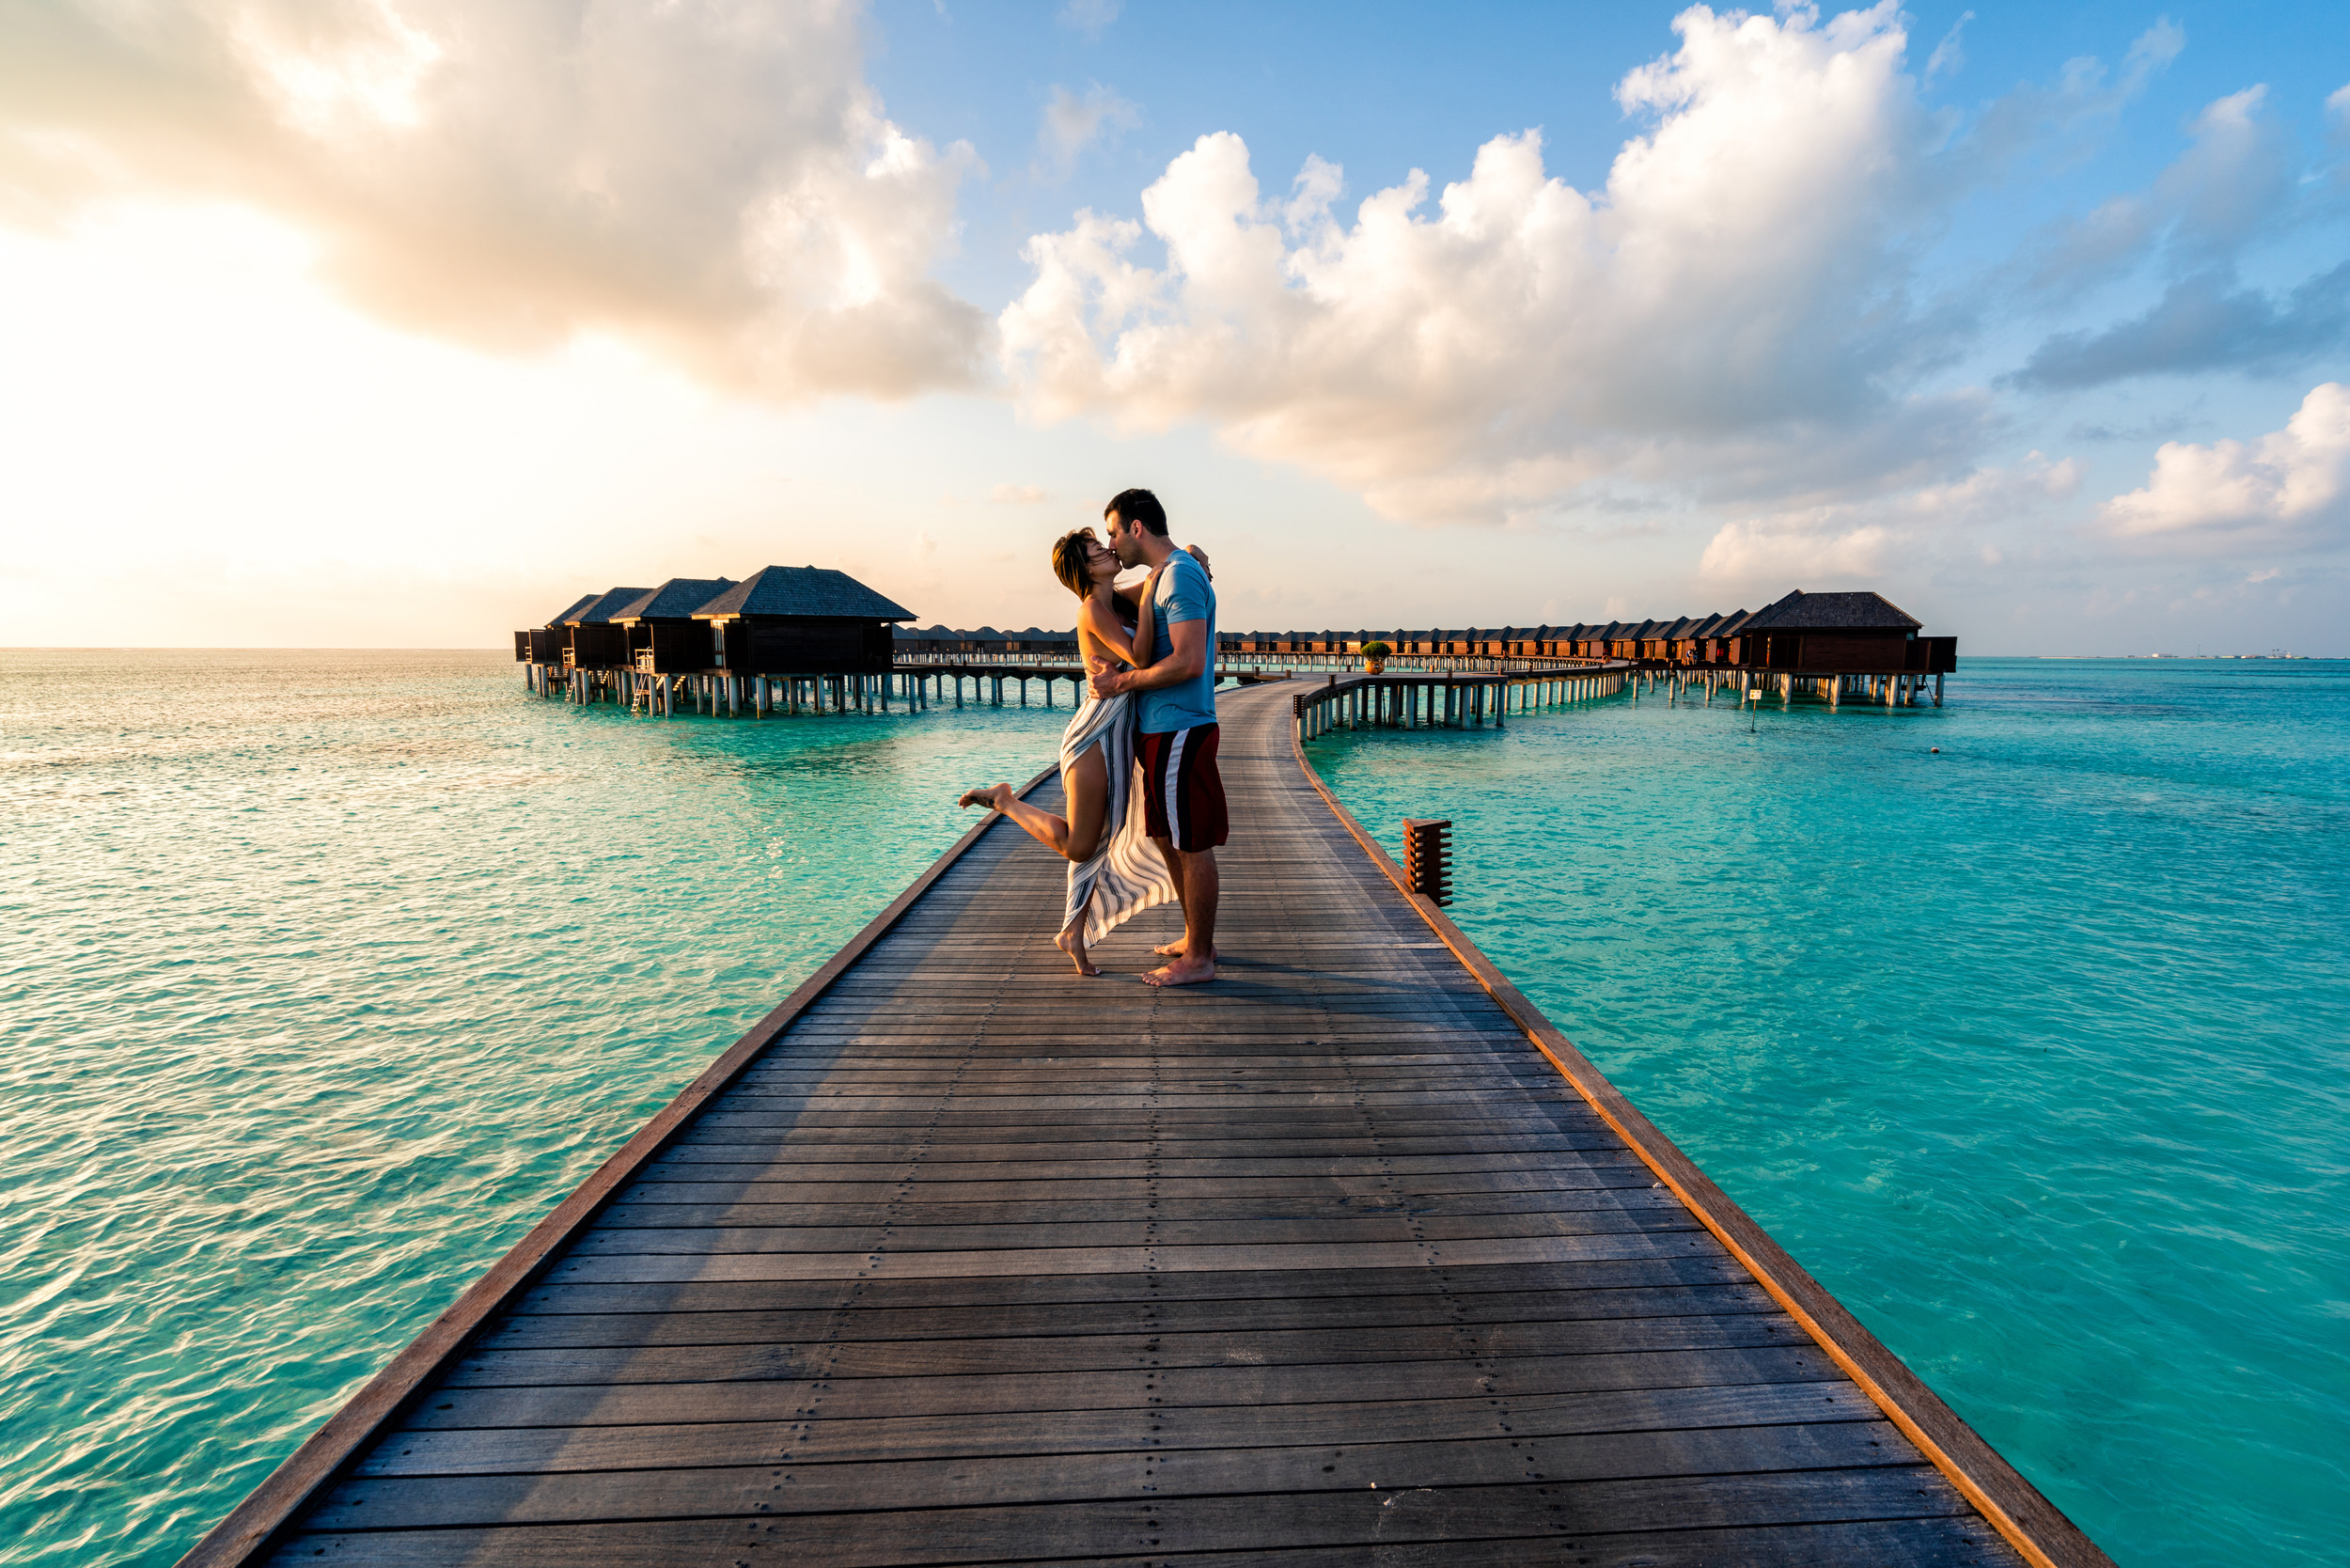 <p>Another dreamy island option to add to your list of potential romantic trips! The Maldives are located between India and Sri Lanka and are full of postcard-perfect beaches and overwater rentals.</p><p><a href='https://www.msn.com/en-us/community/channel/vid-cj9pqbr0vn9in2b6ddcd8sfgpfq6x6utp44fssrv6mc2gtybw0us'>Follow us on MSN to see more of our exclusive lifestyle content.</a></p>